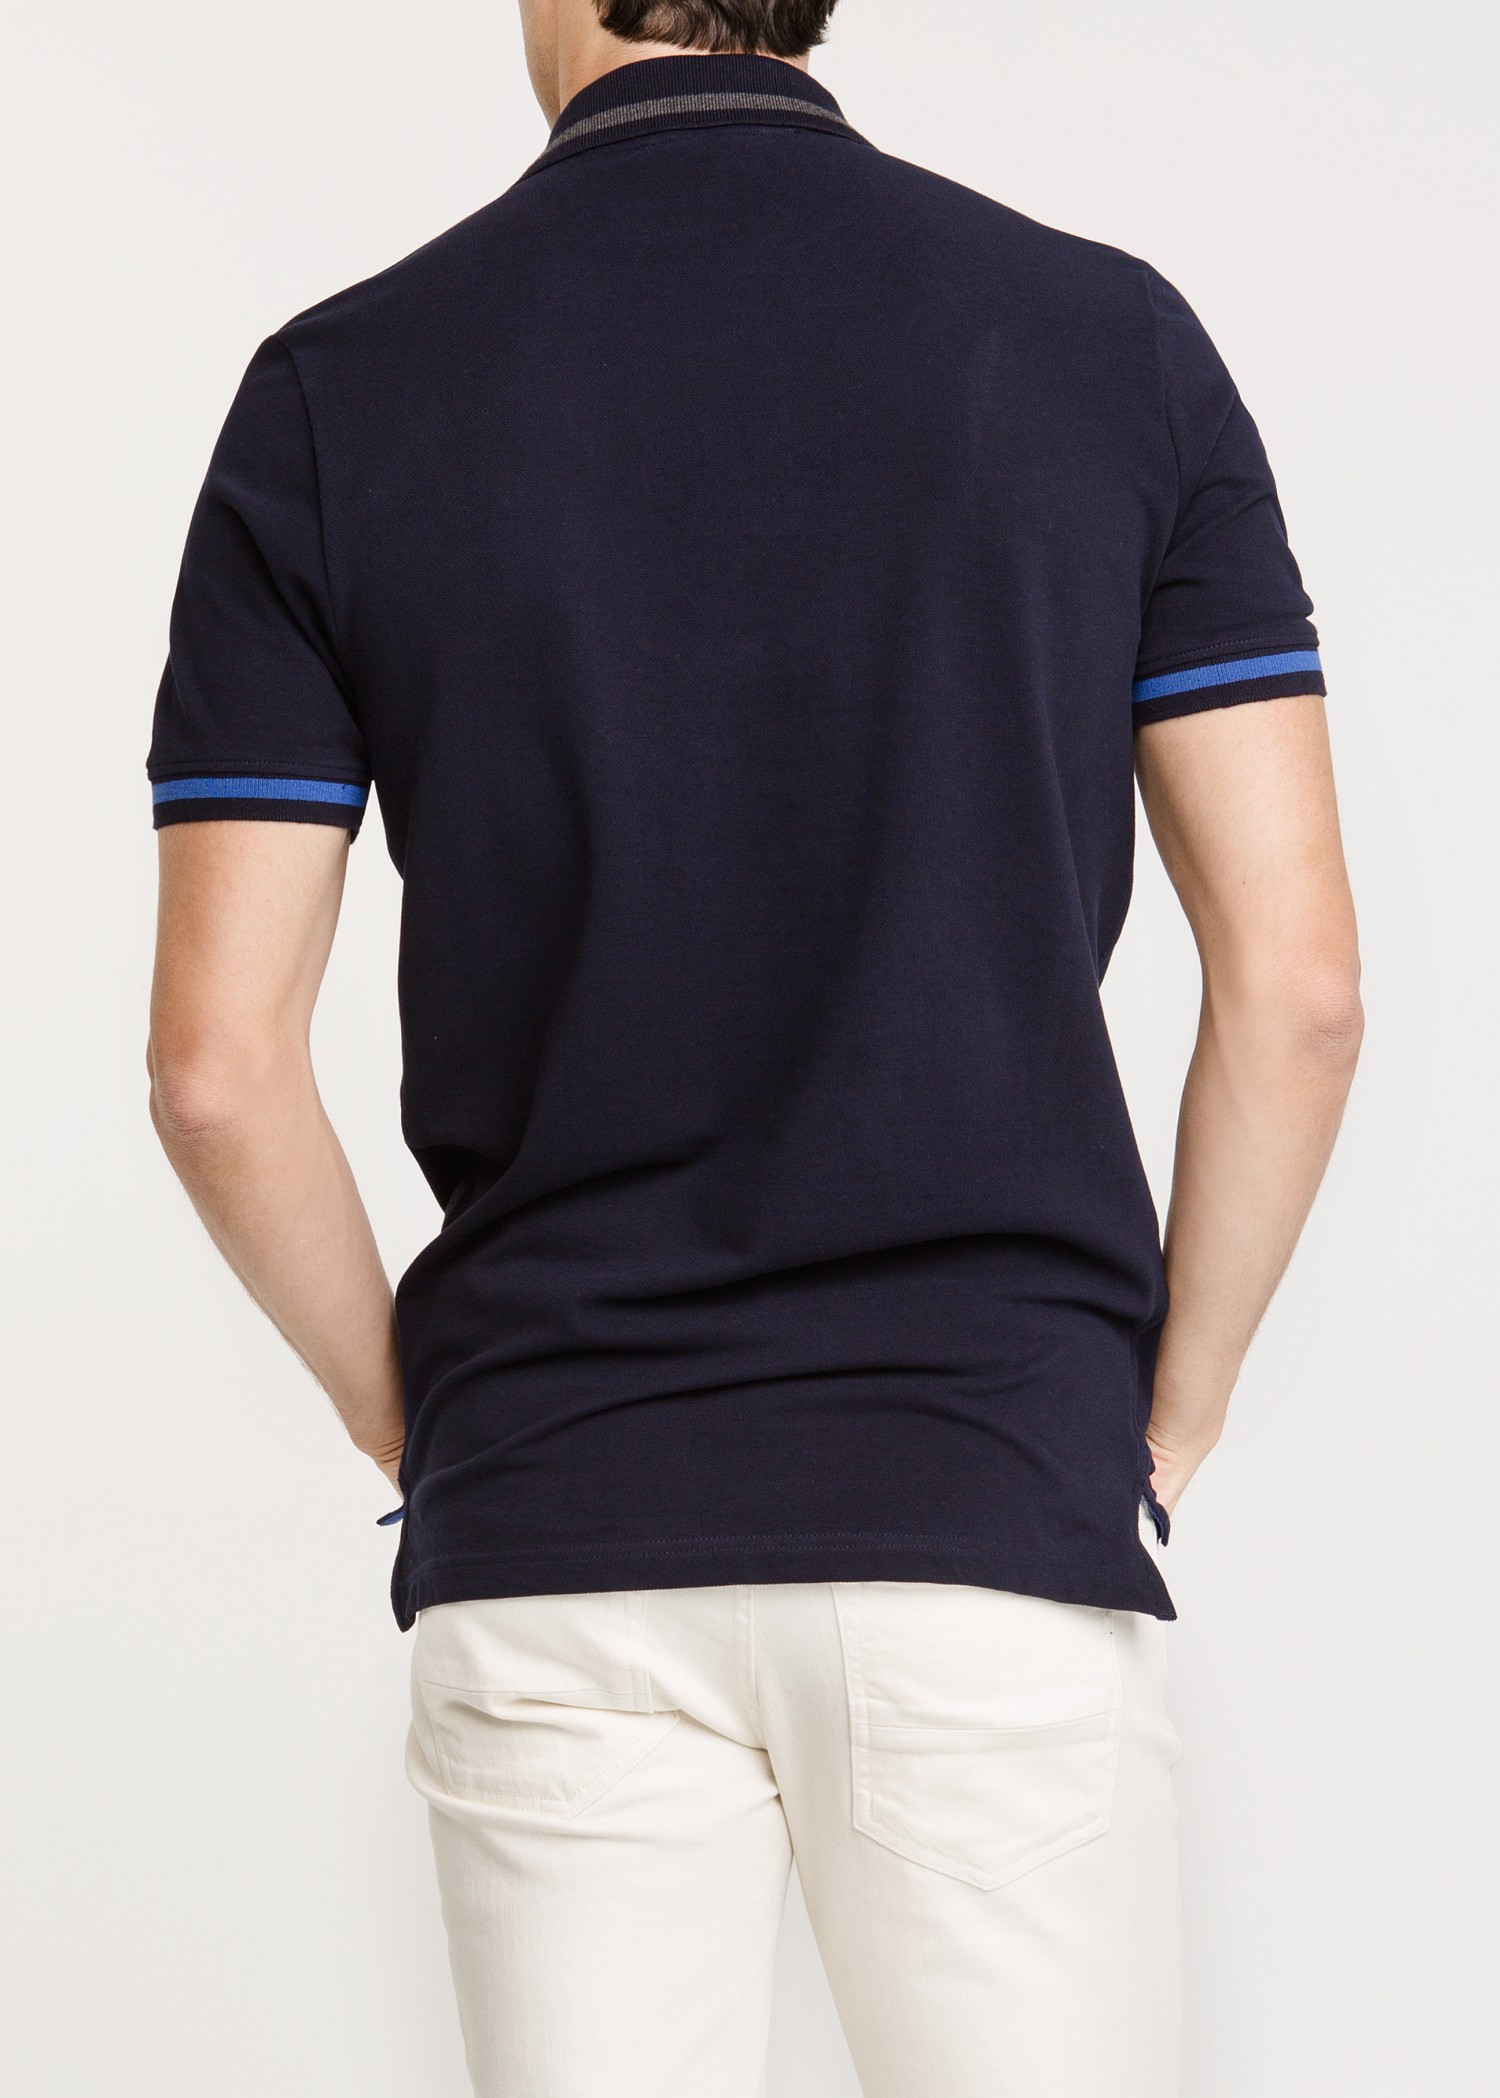 Lyst - Mango Contrasted Trimmings Pique Polo Shirt in Blue for Men